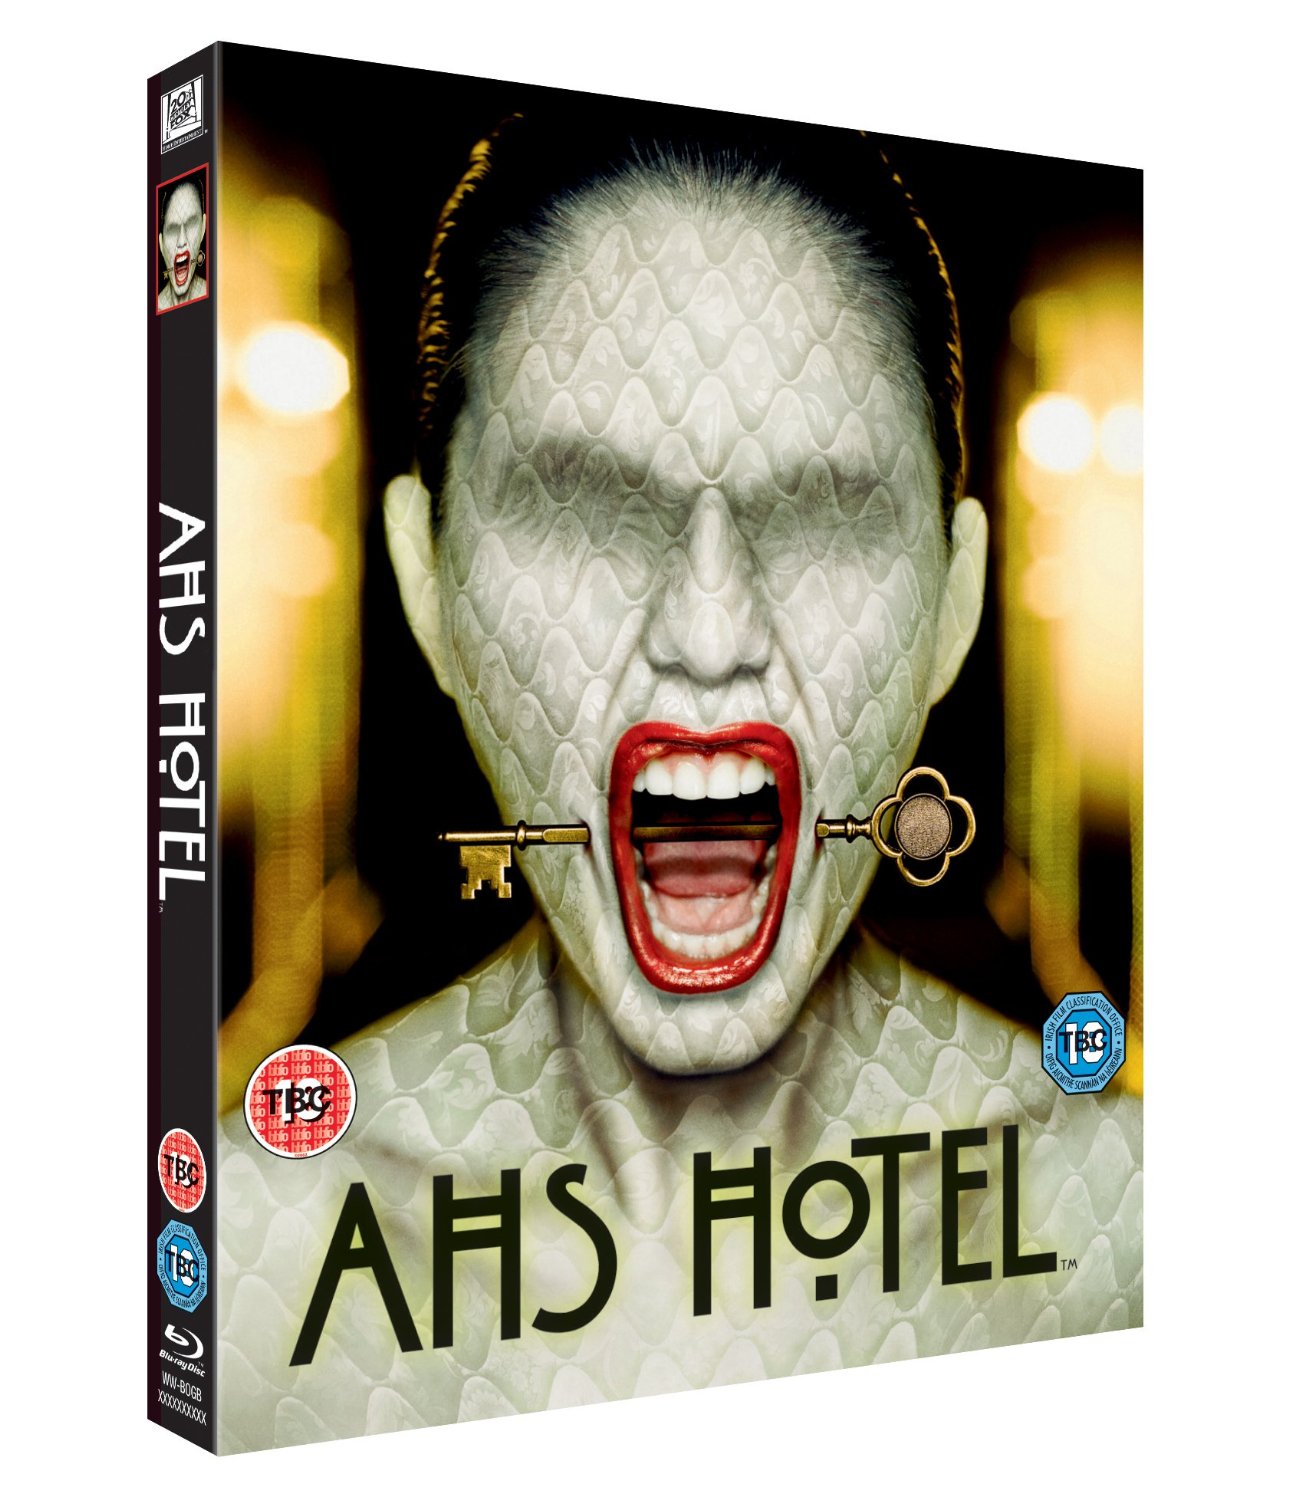 American Horror Story: Hotel Blu-ray review